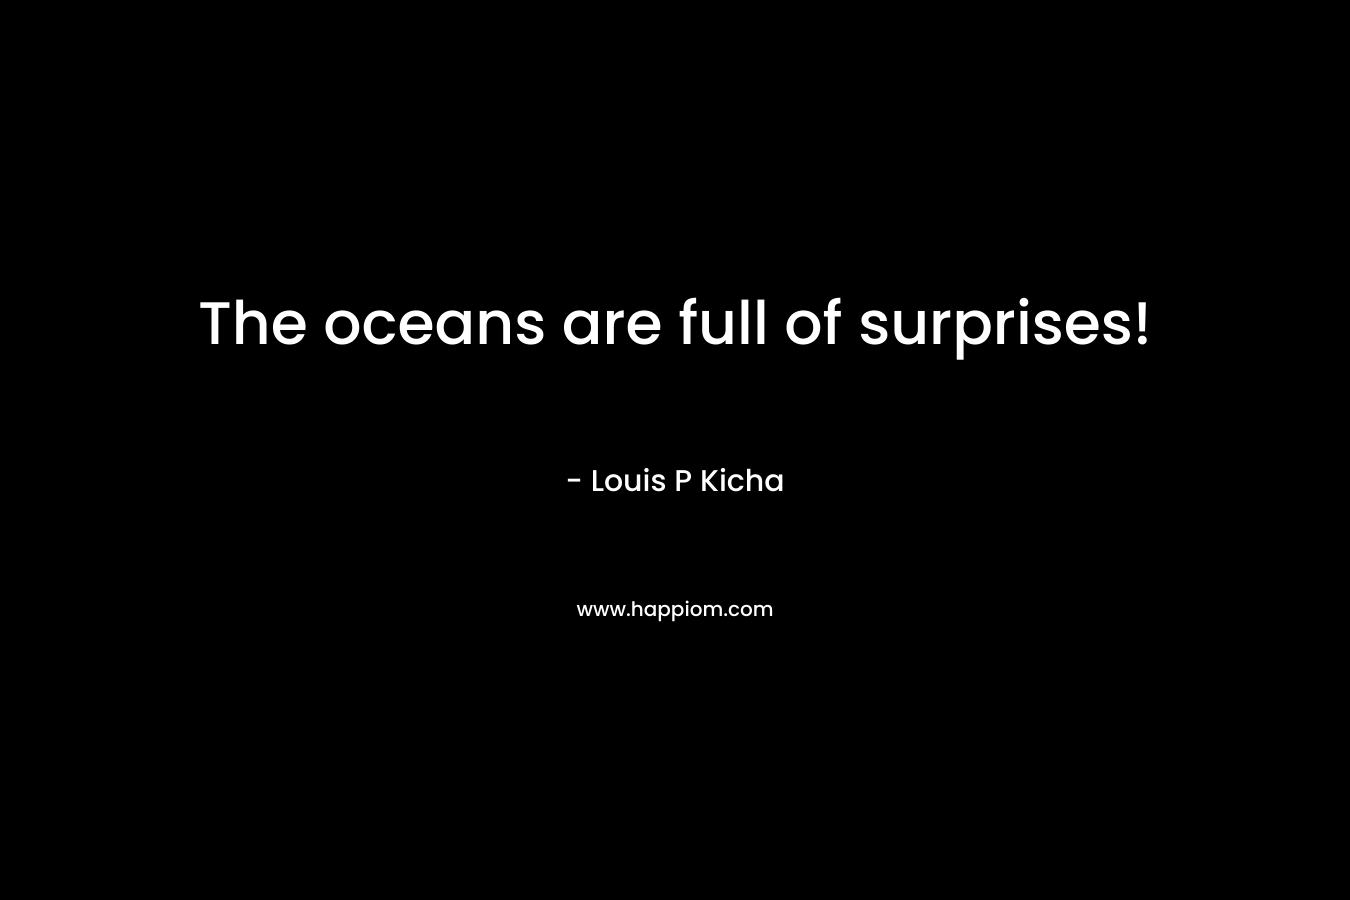 The oceans are full of surprises!